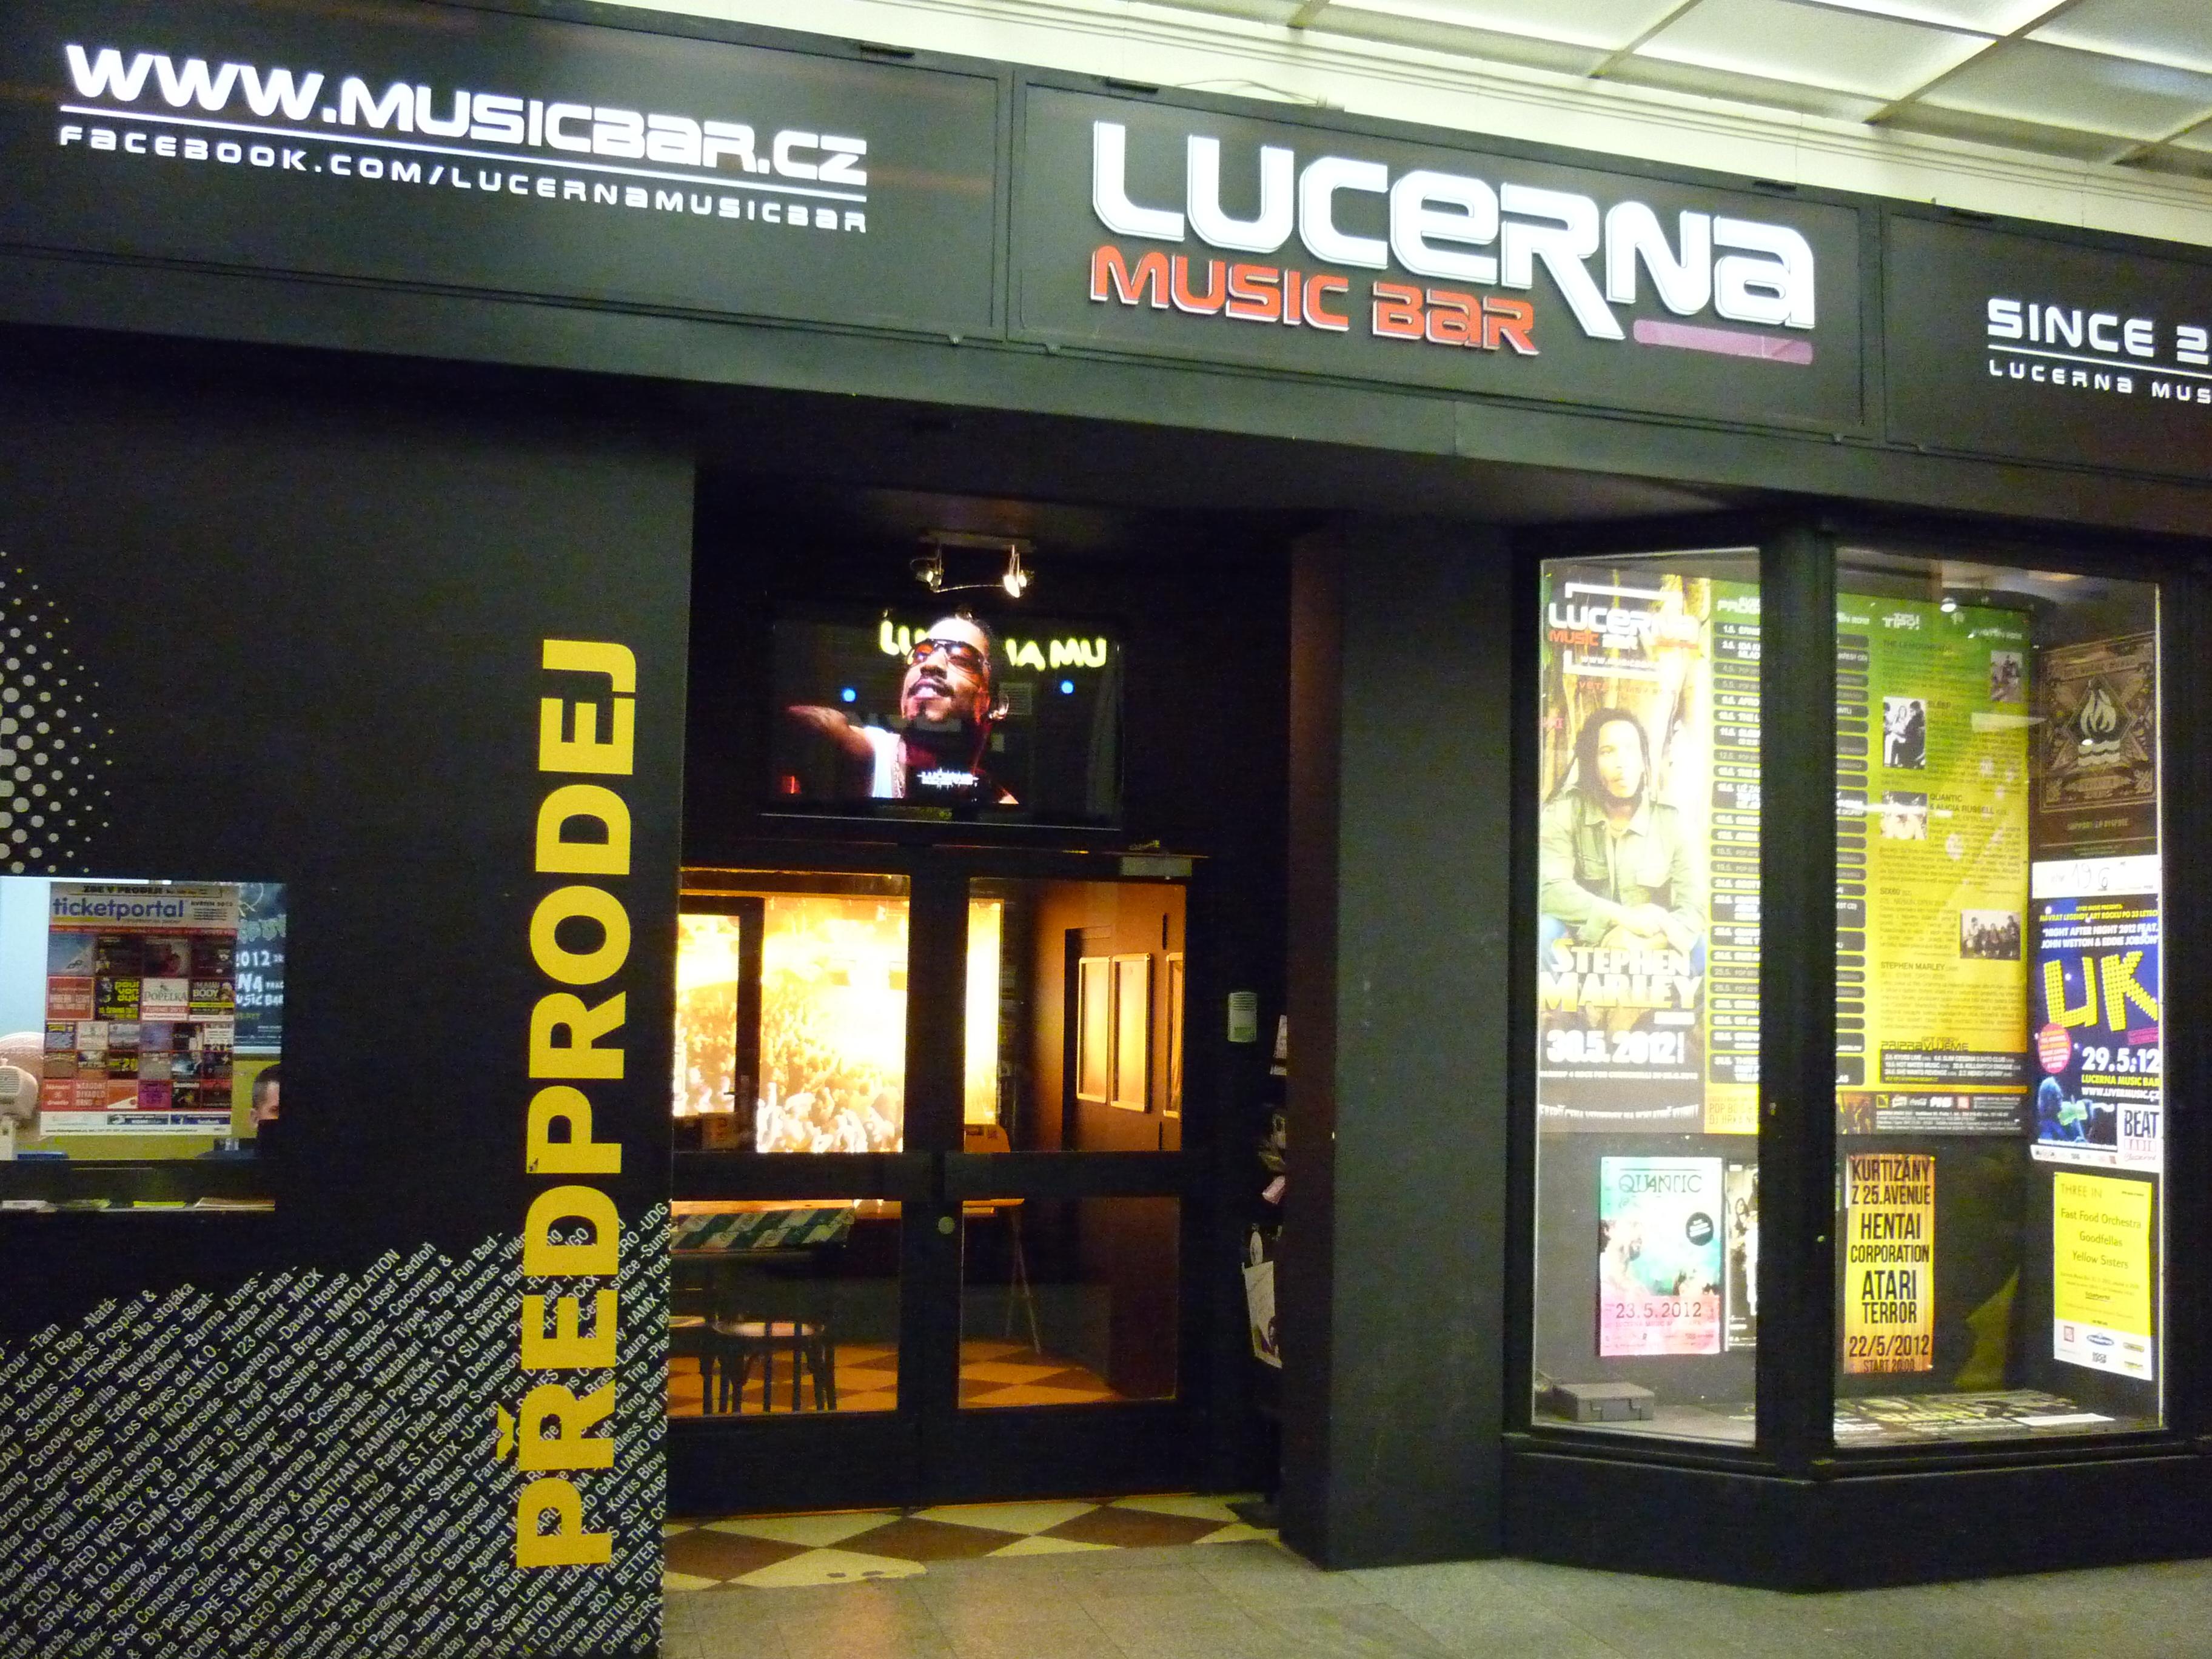 Cover image of this place Lucerna Music Bar